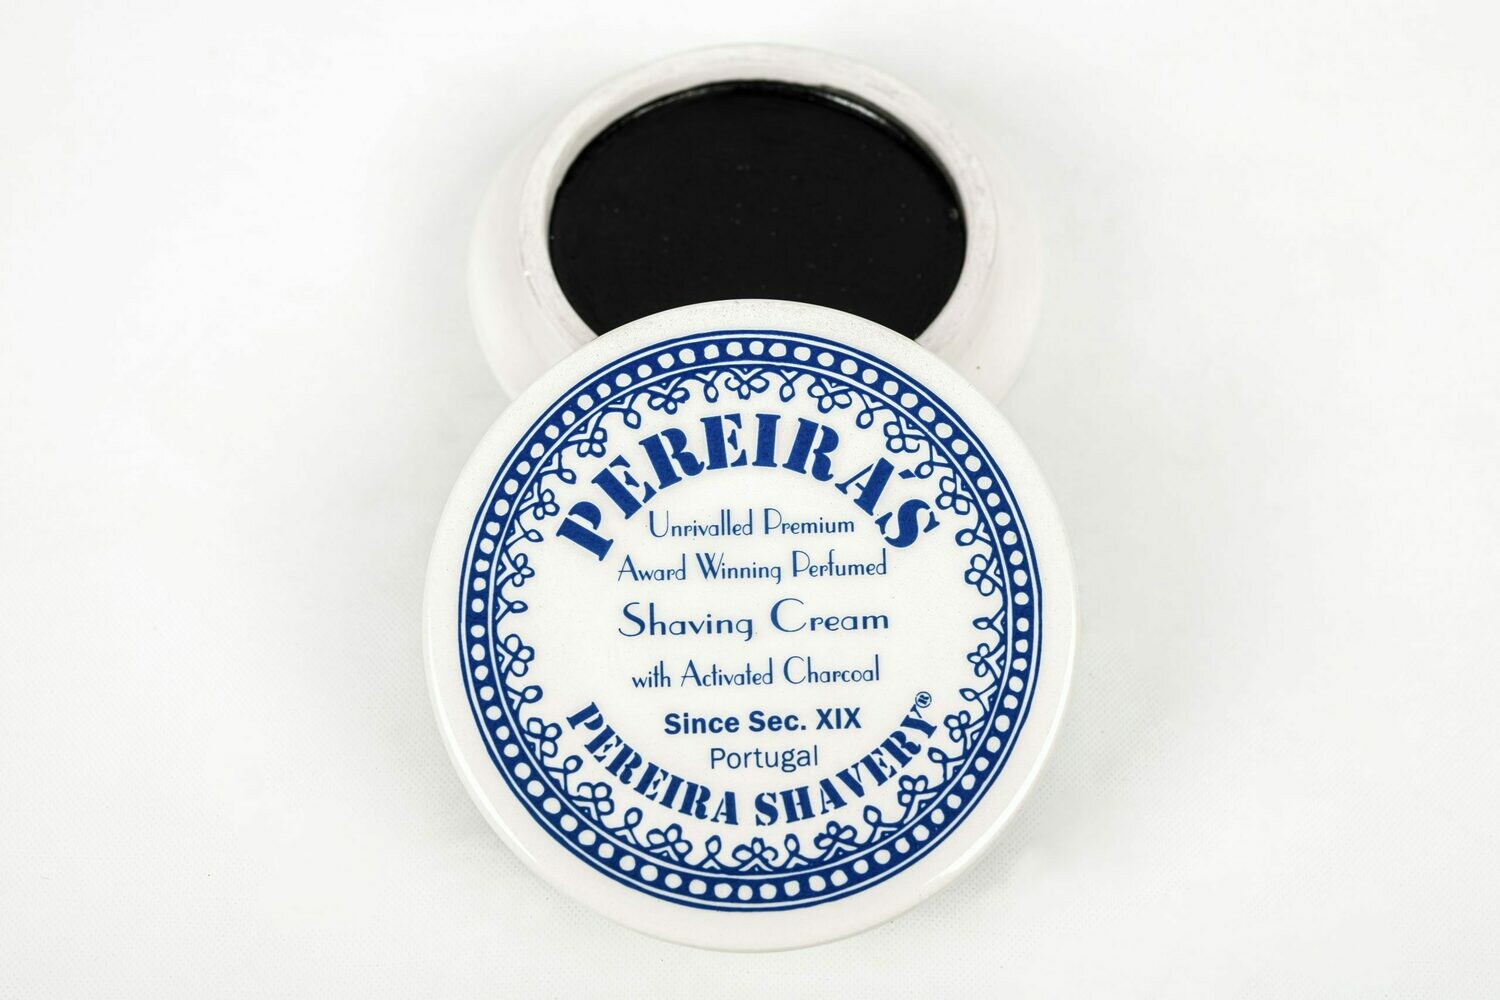 Pereira Shavery Shaving Soap With Activated Charcoal In Ceramic Dish With Different Aromatherapy Options